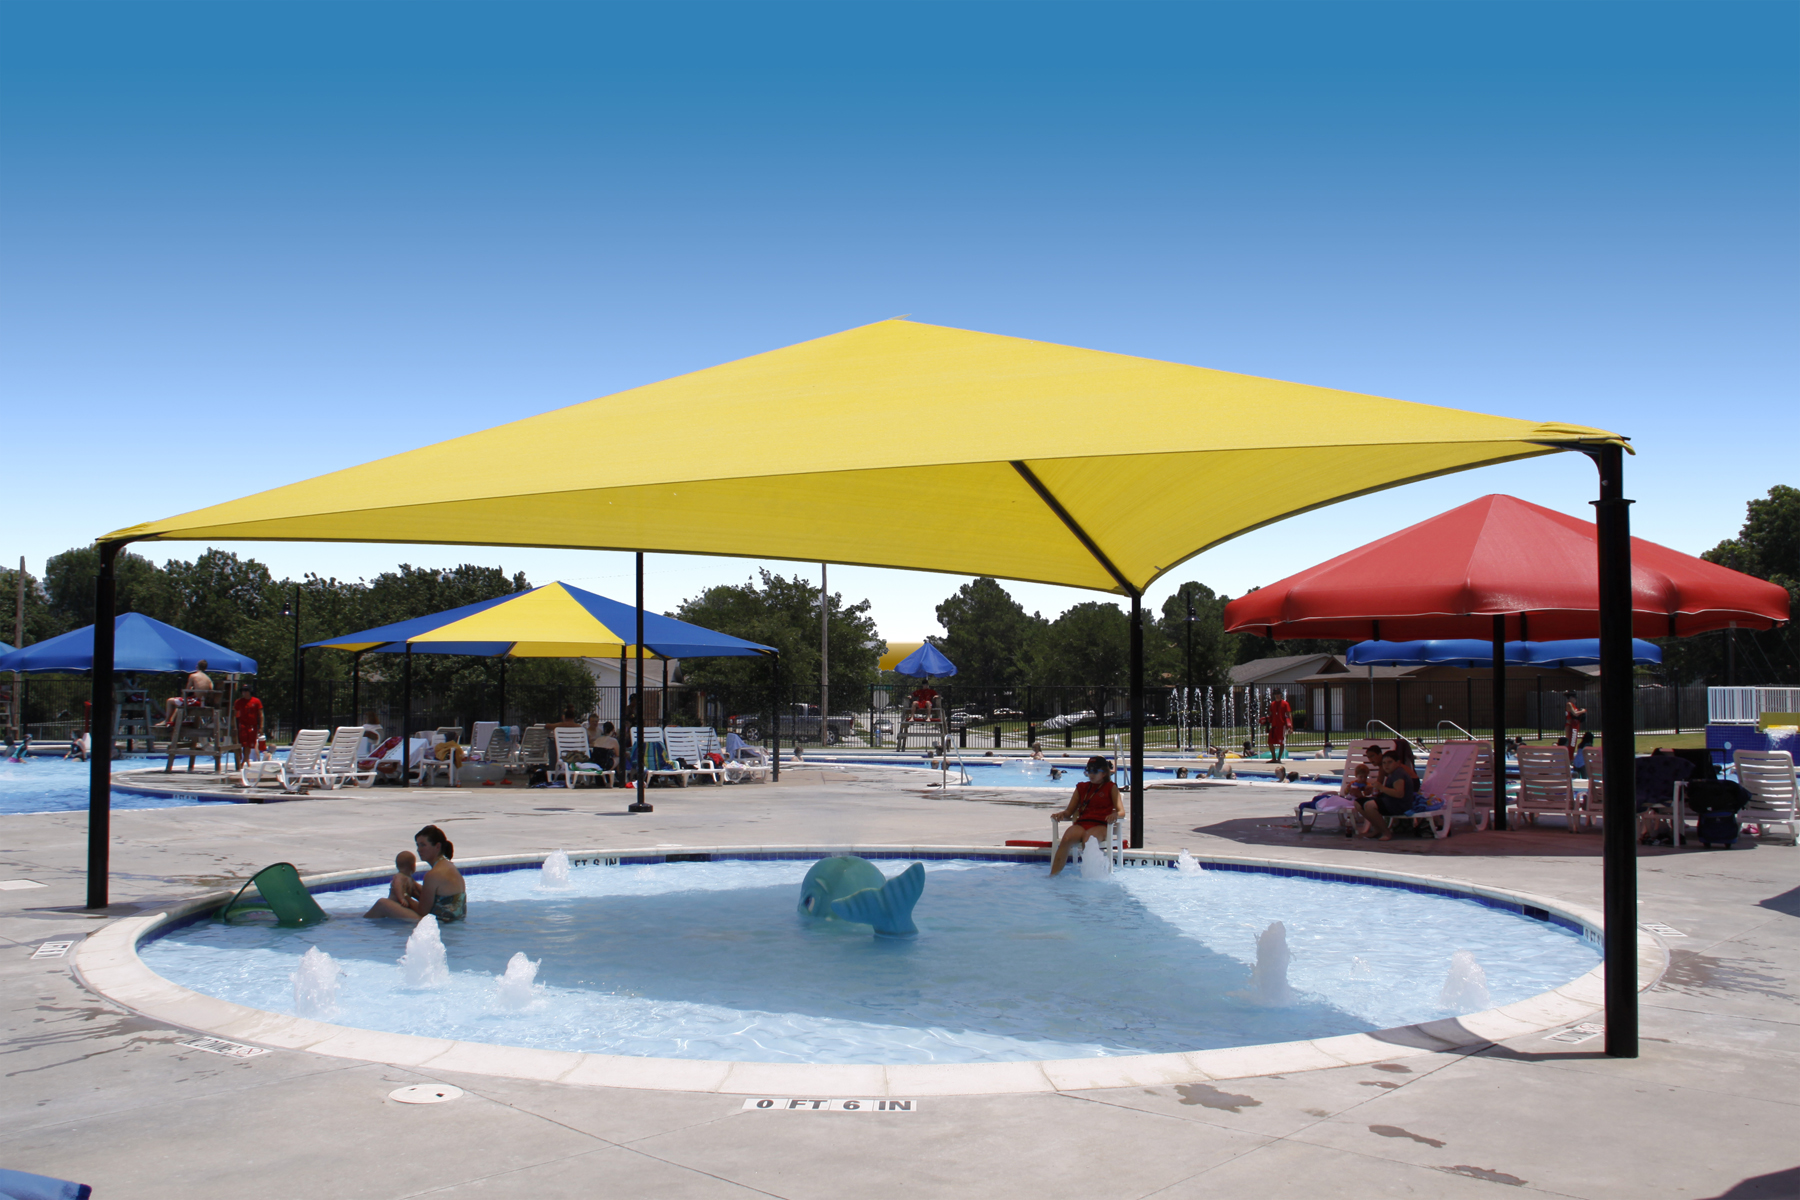 triangle sun shade covering outdoor children's pool